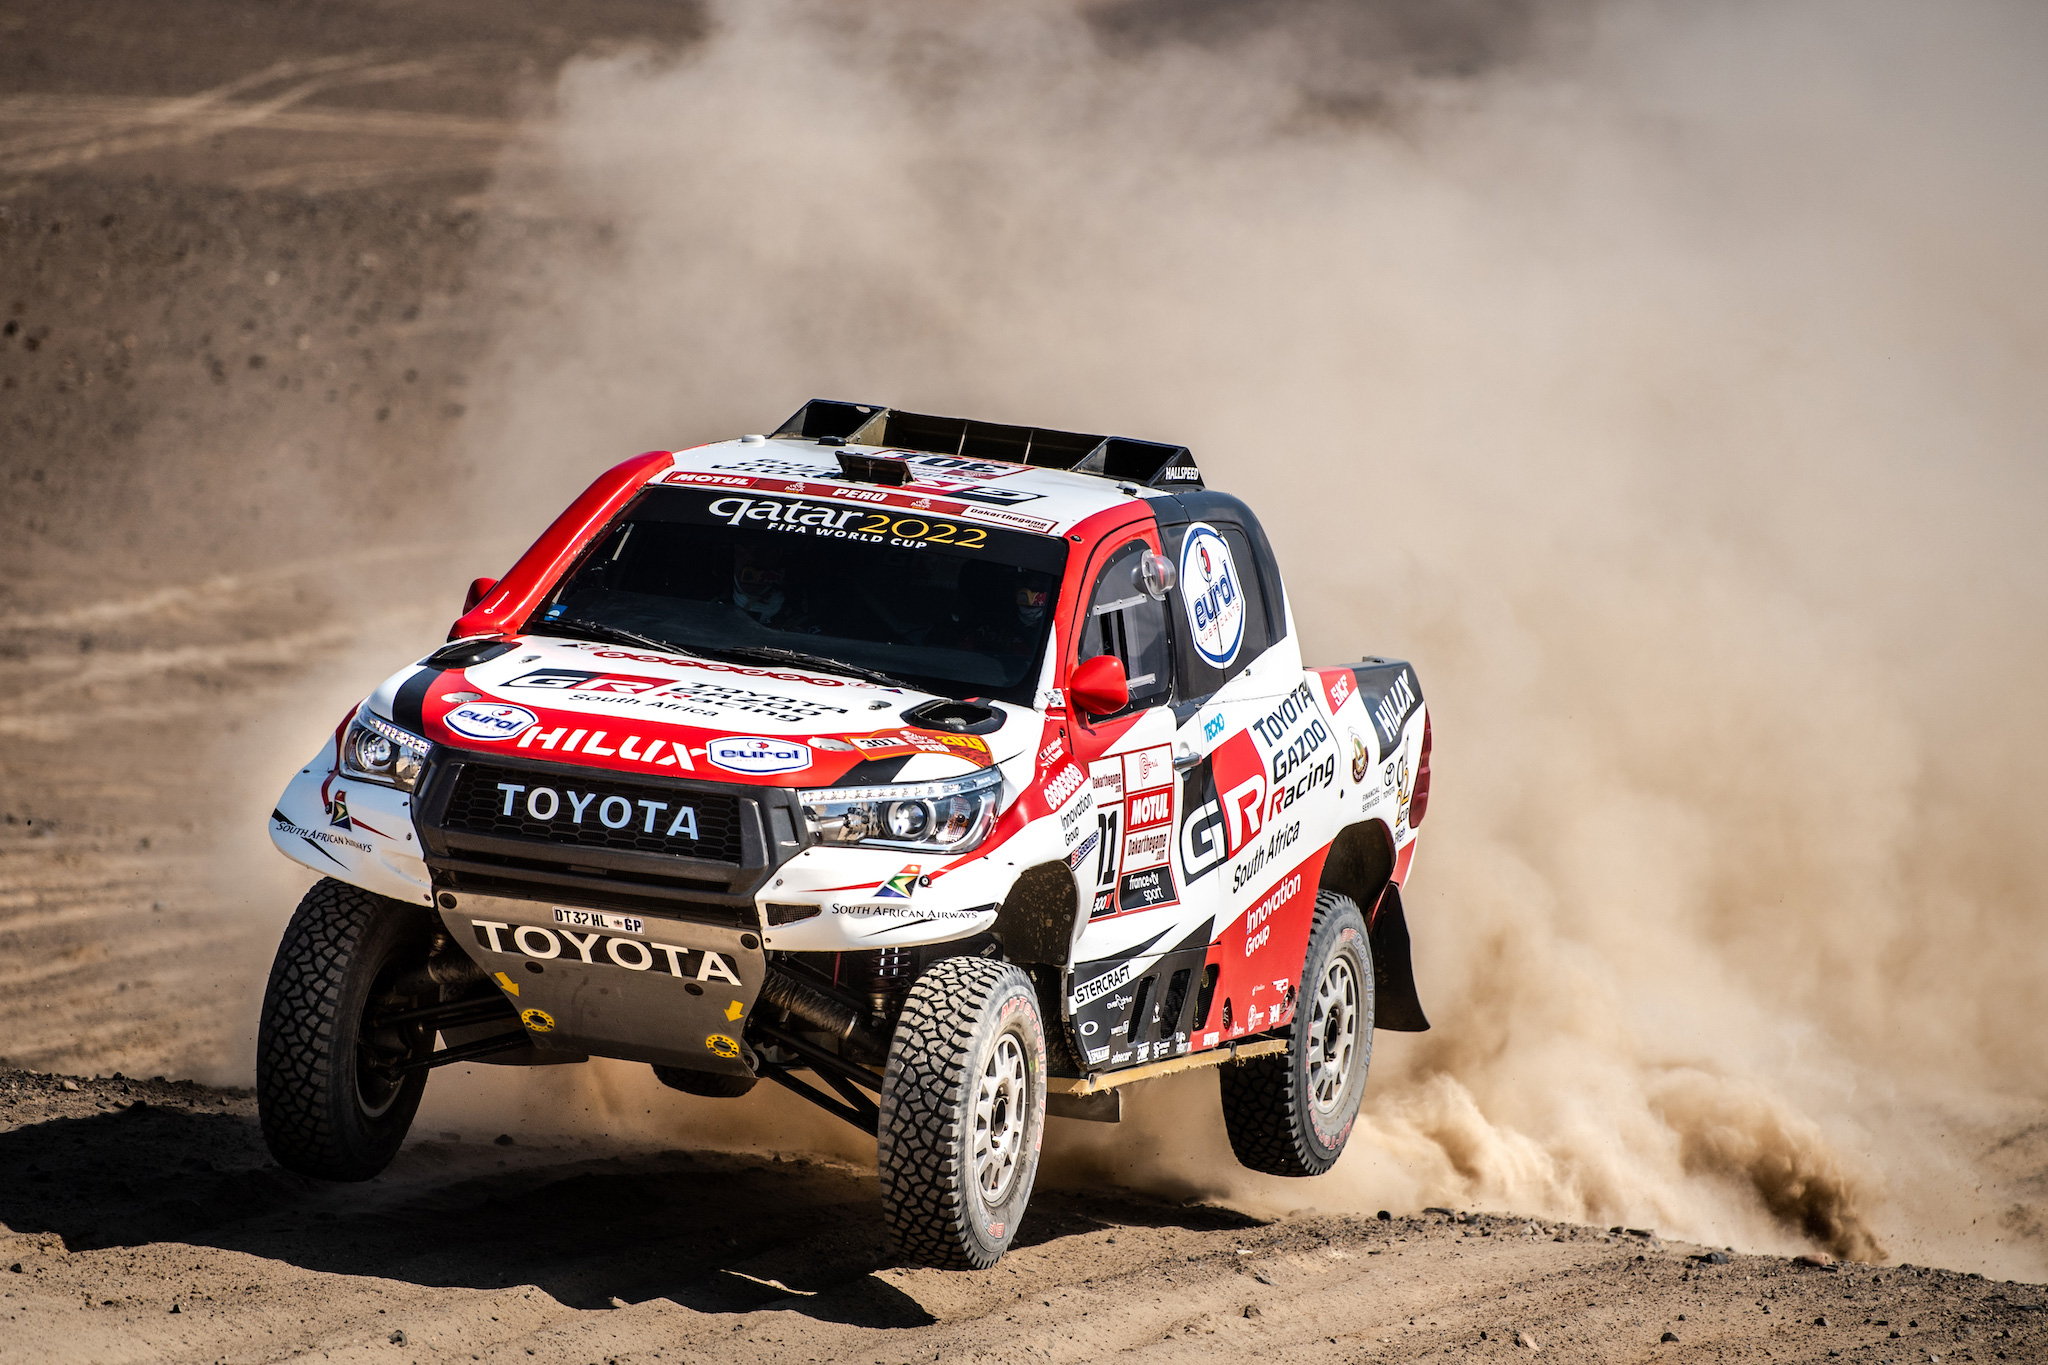 Toyota Hilux Steals Show Claiming Victory at 2019 Dakar Rally